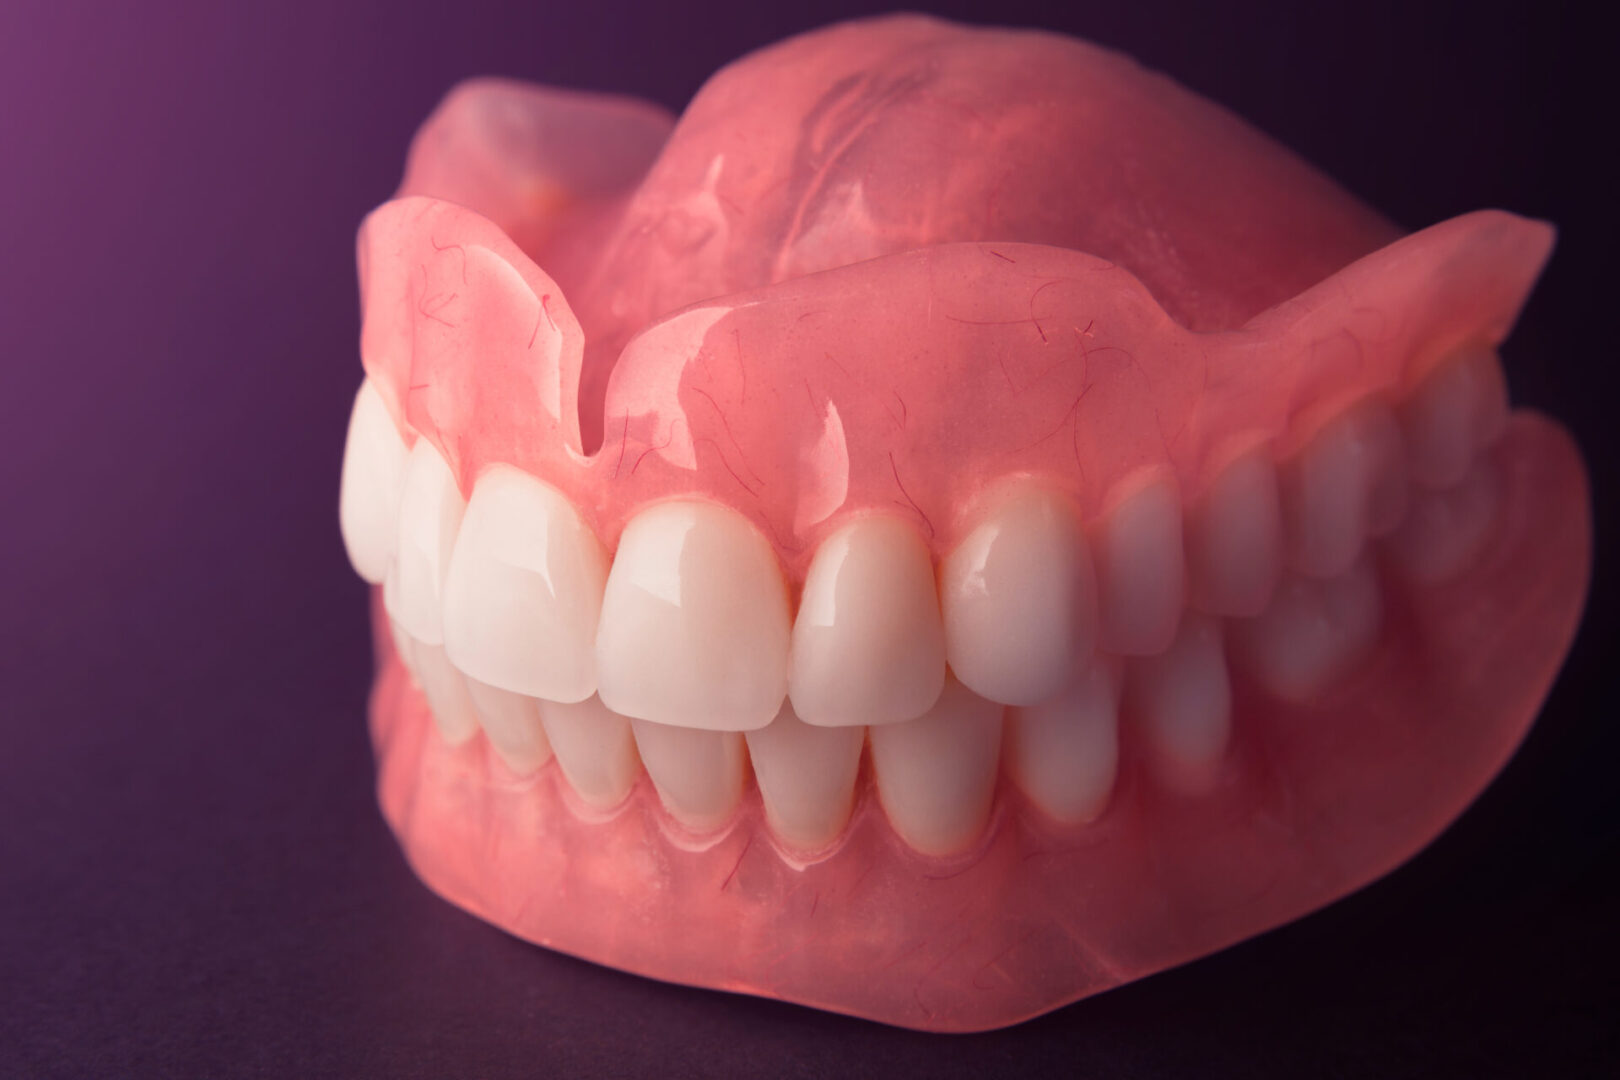 Acrylic,Denture,Prosthesis,Of,The,Upper,And,Lower,Jaws,Of